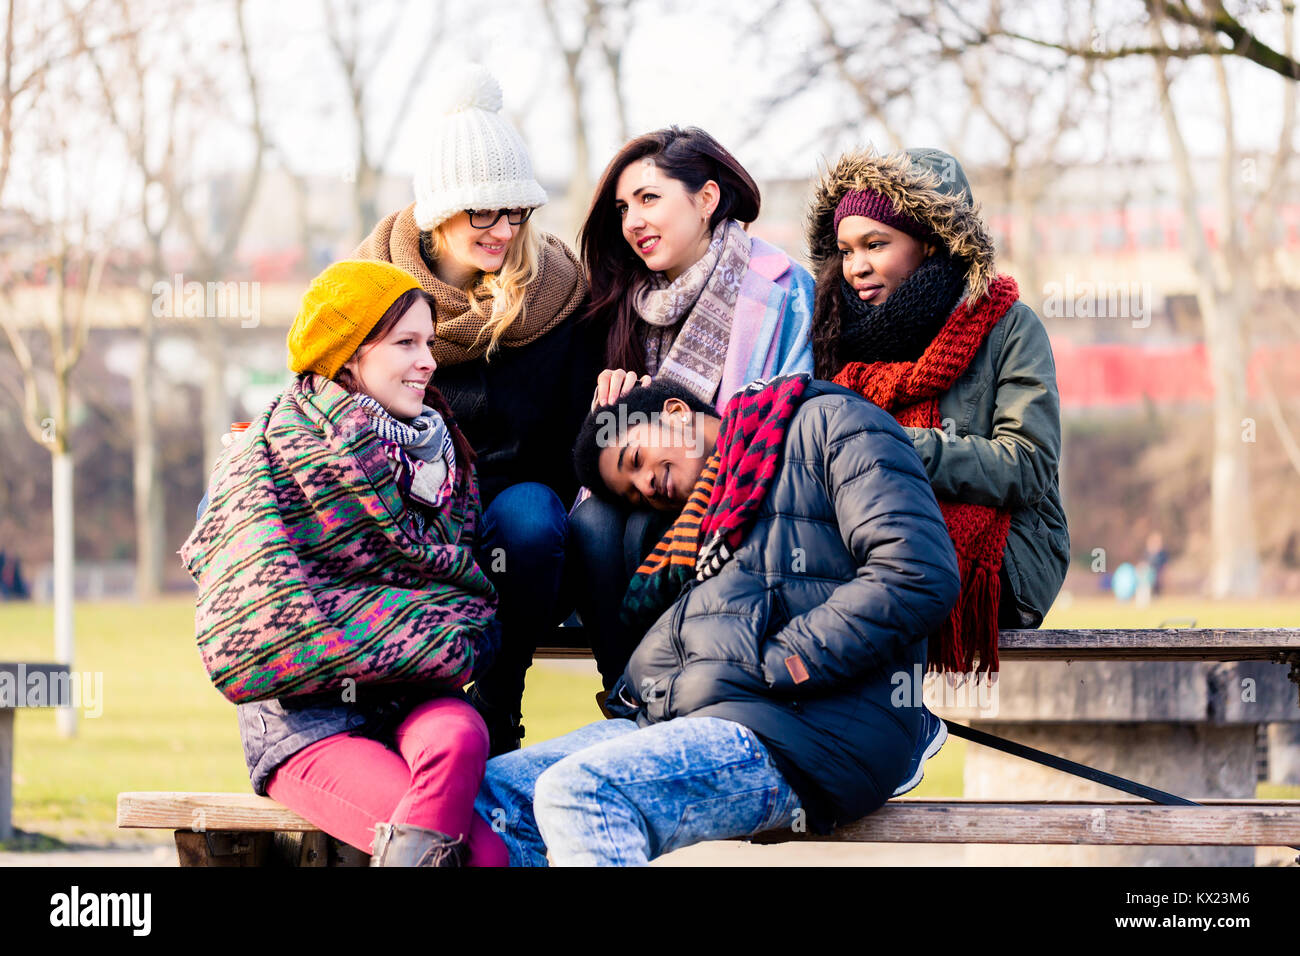 Beautiful young people sitting together in the park Stock Photo